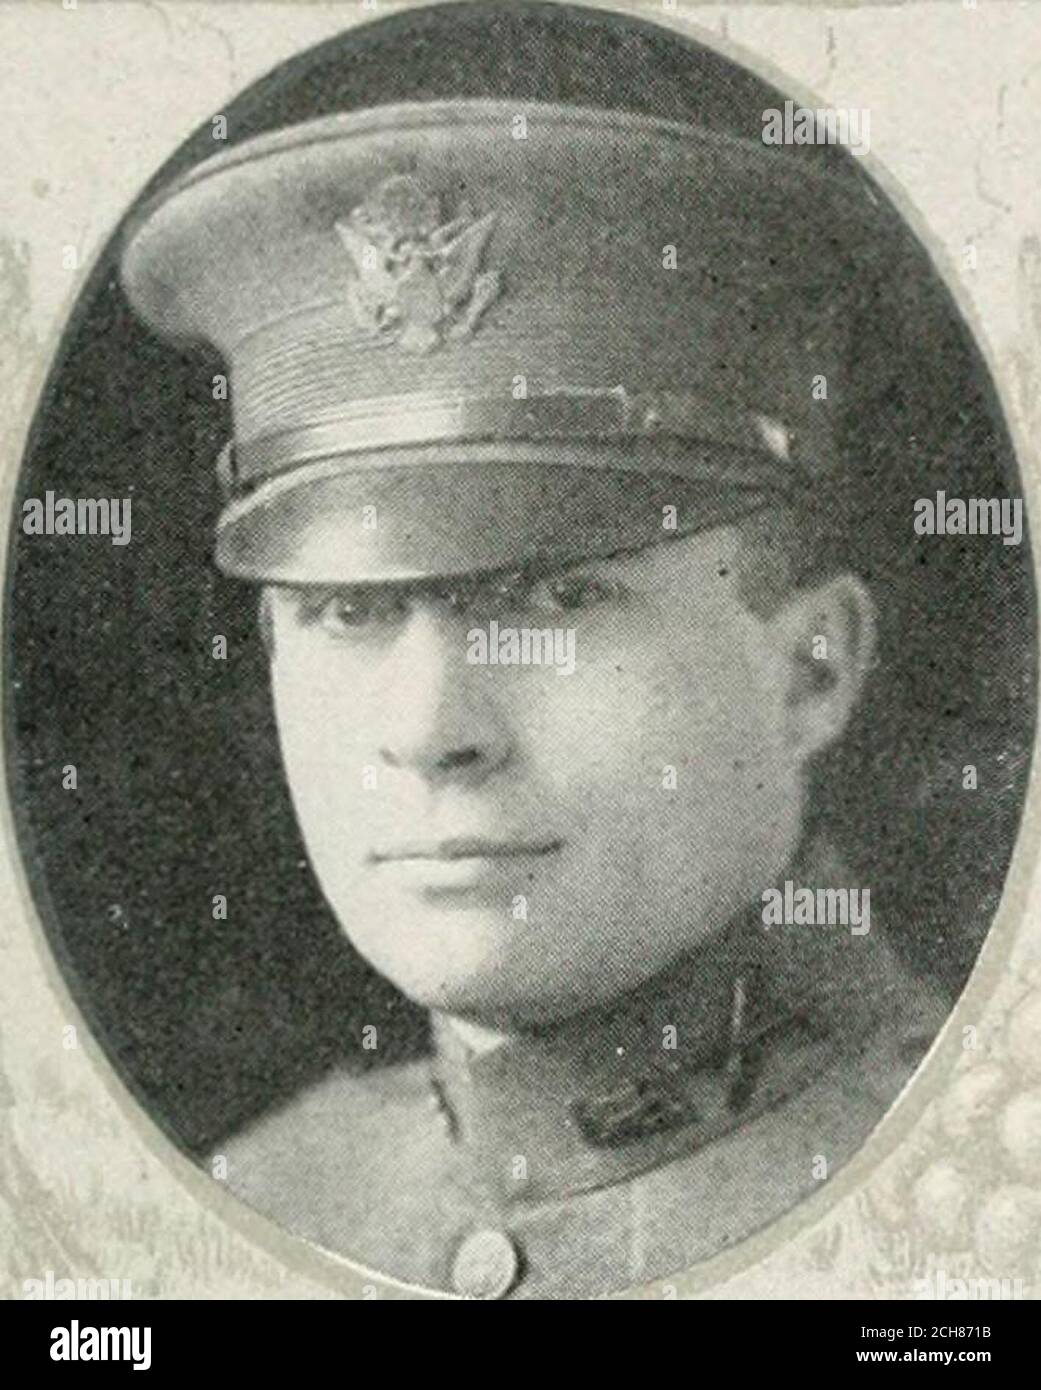 . The history and achievements of the Fort Scheridan officers' training camps . sing man-ager of the Studebaker Corporation; salesmanager Commerce Motor Car Co., twoyears, then entered the advertising busi-ness for himself, with headquarters inChicago. He served in the 7th Regimentof the New York National Guard, and alsowith Battery C of the Illinois Guard, withwhich outfit he saw border service in1916-17. He was admitted to the Sec-ond Officers Training Camp, Fort Sheri-dan, being assigned to the 7th Battery. Hesailed for France as a casual officer onJanuary 7, 1918. Captain Pettit receivedfu Stock Photo